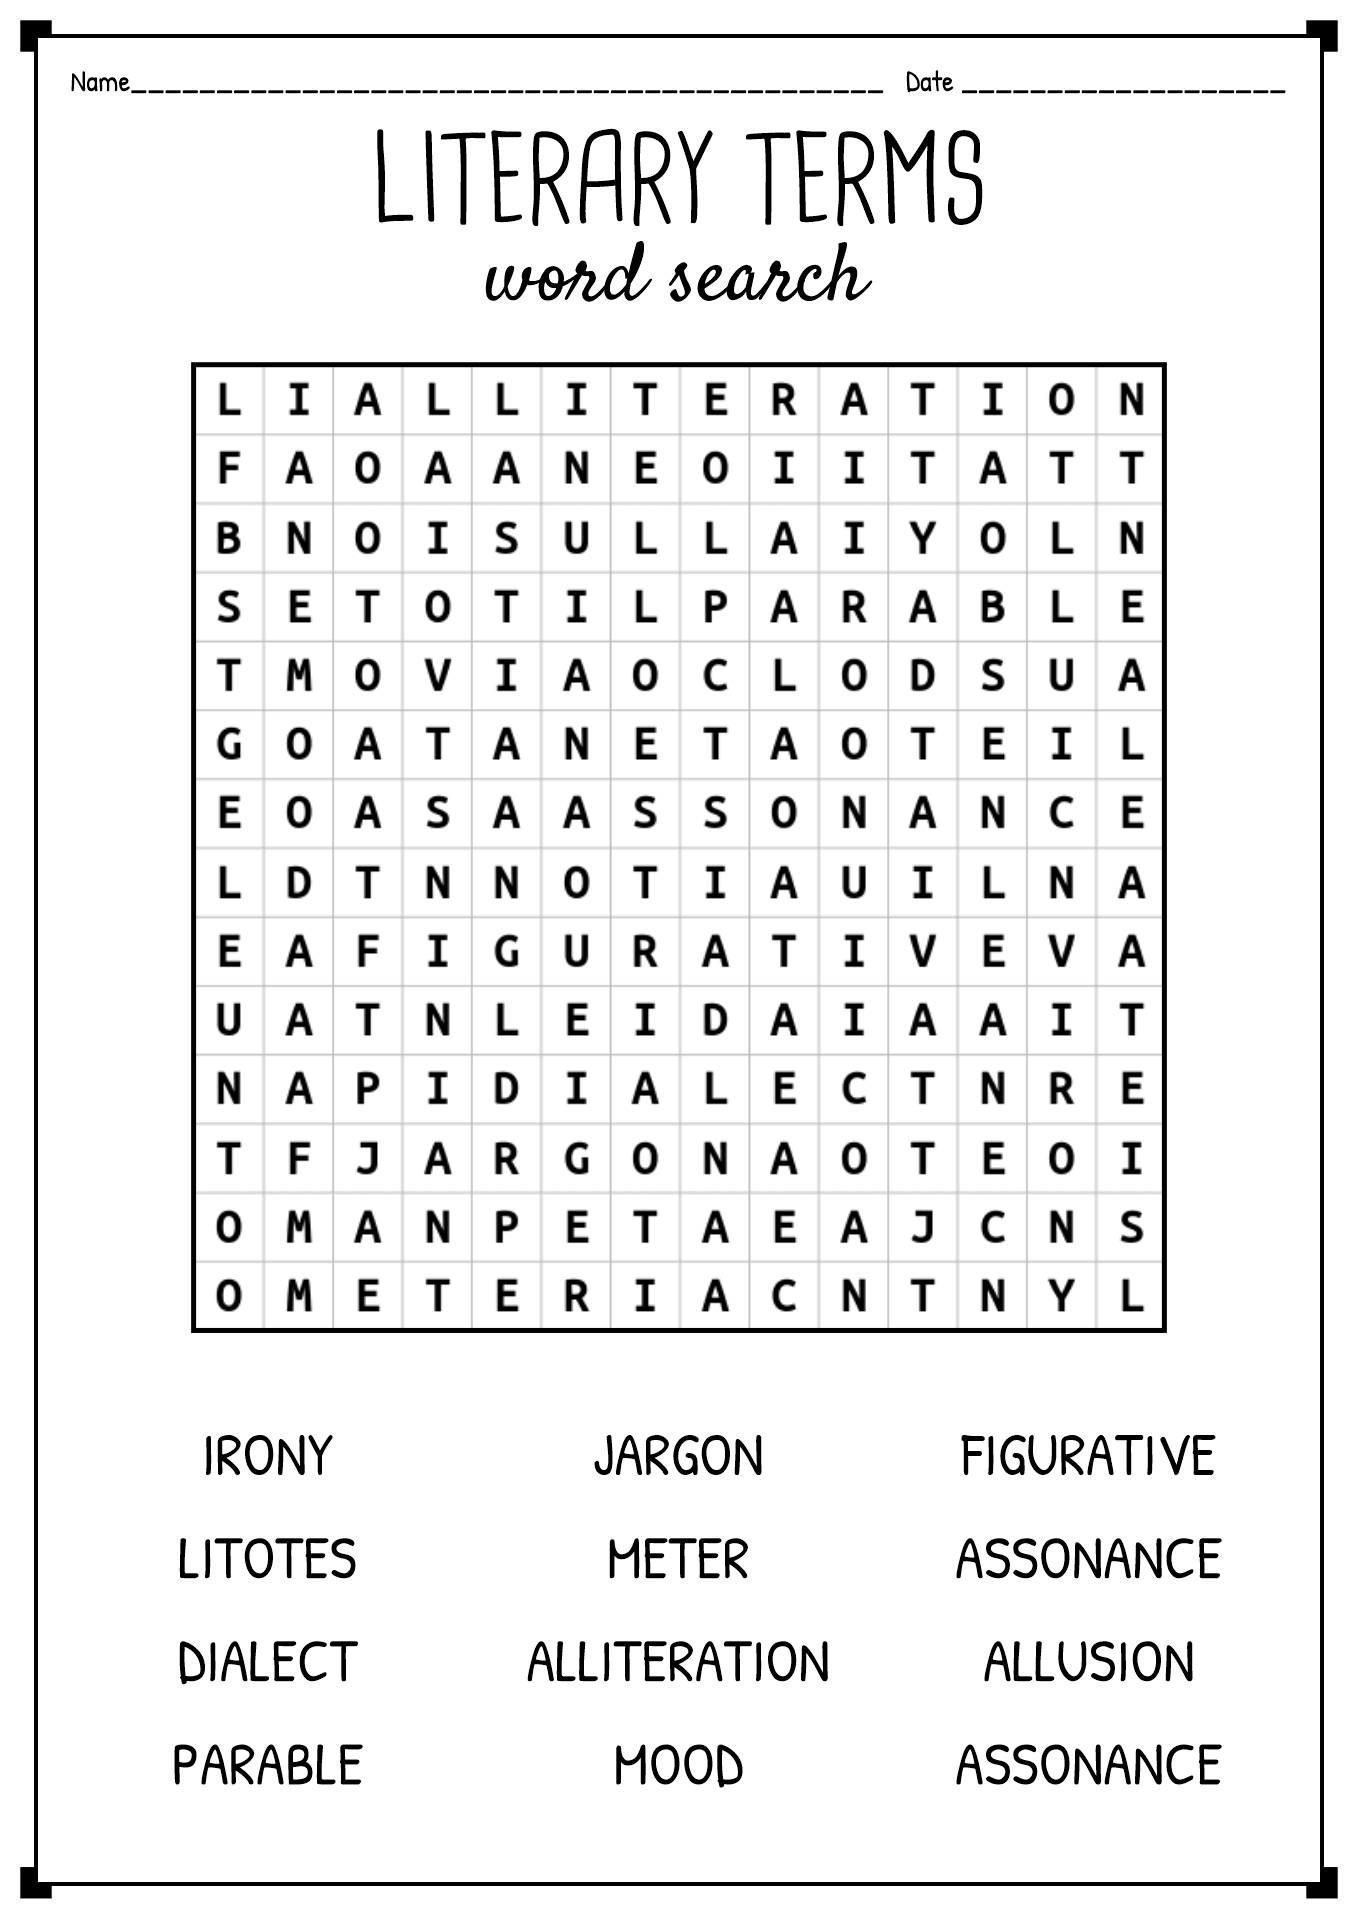 12-best-images-of-element-word-search-worksheet-elements-word-search-puzzle-element-word